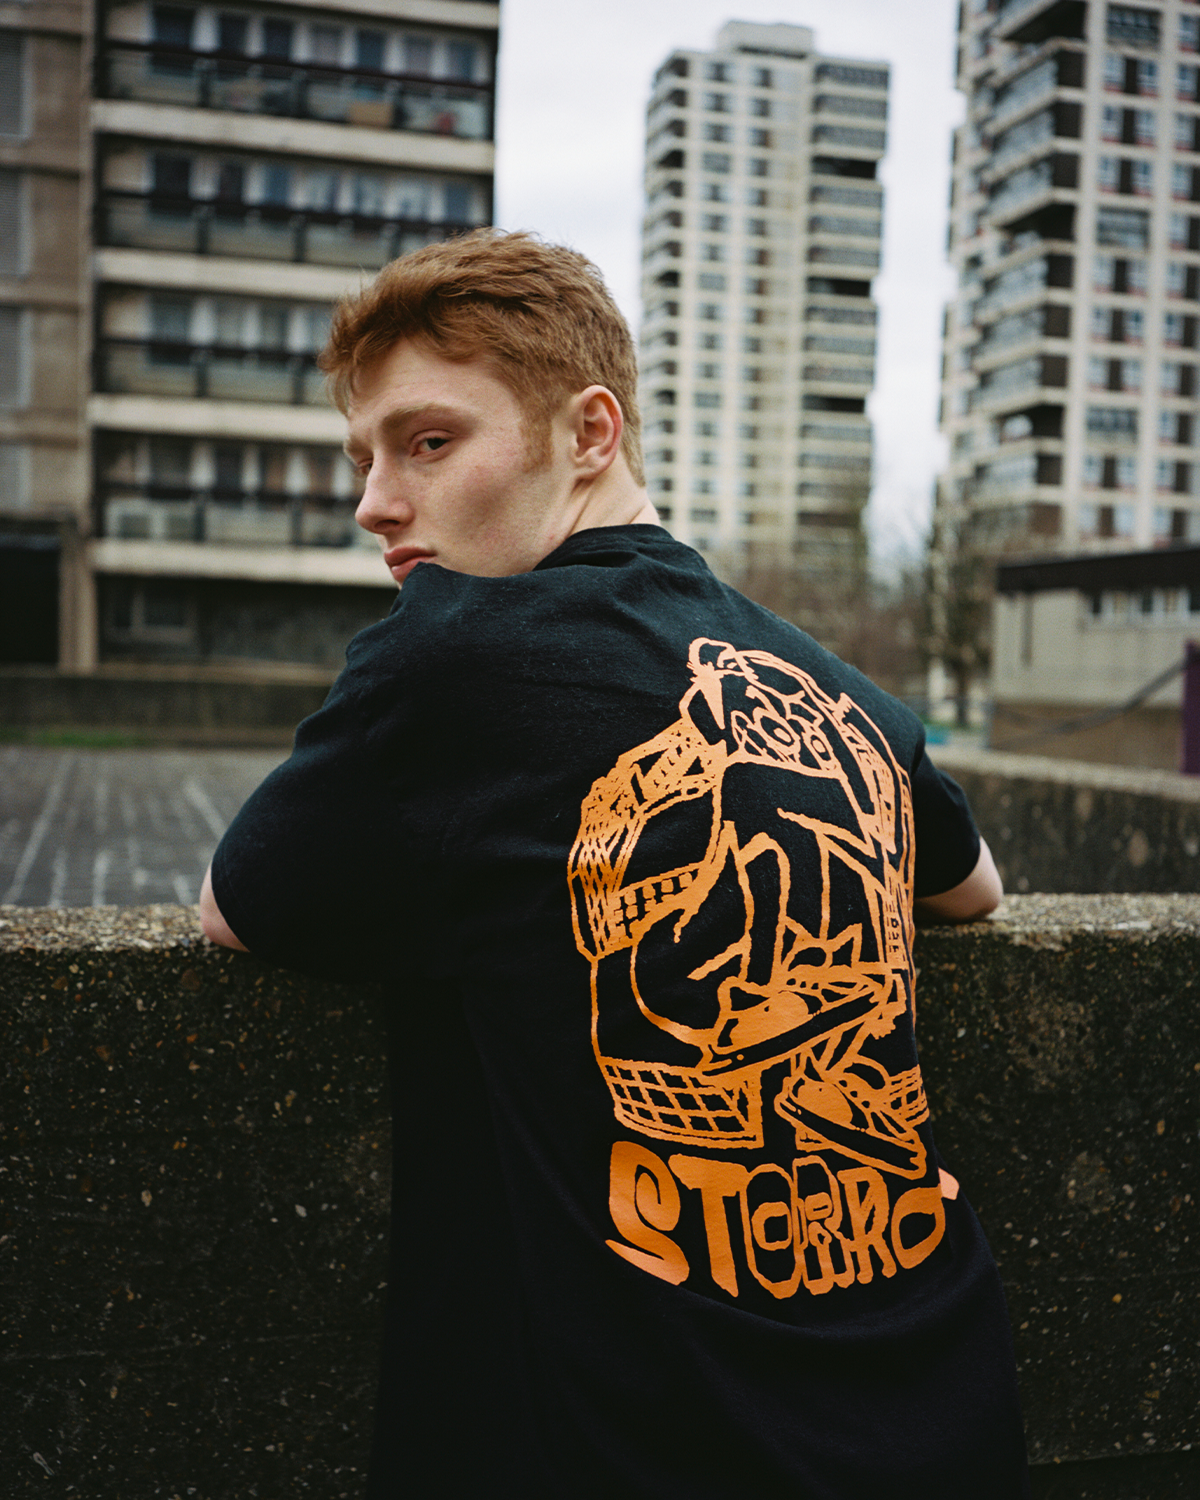 CITY T-SHIRT | STORROR | parkour clothing & technical sportswear